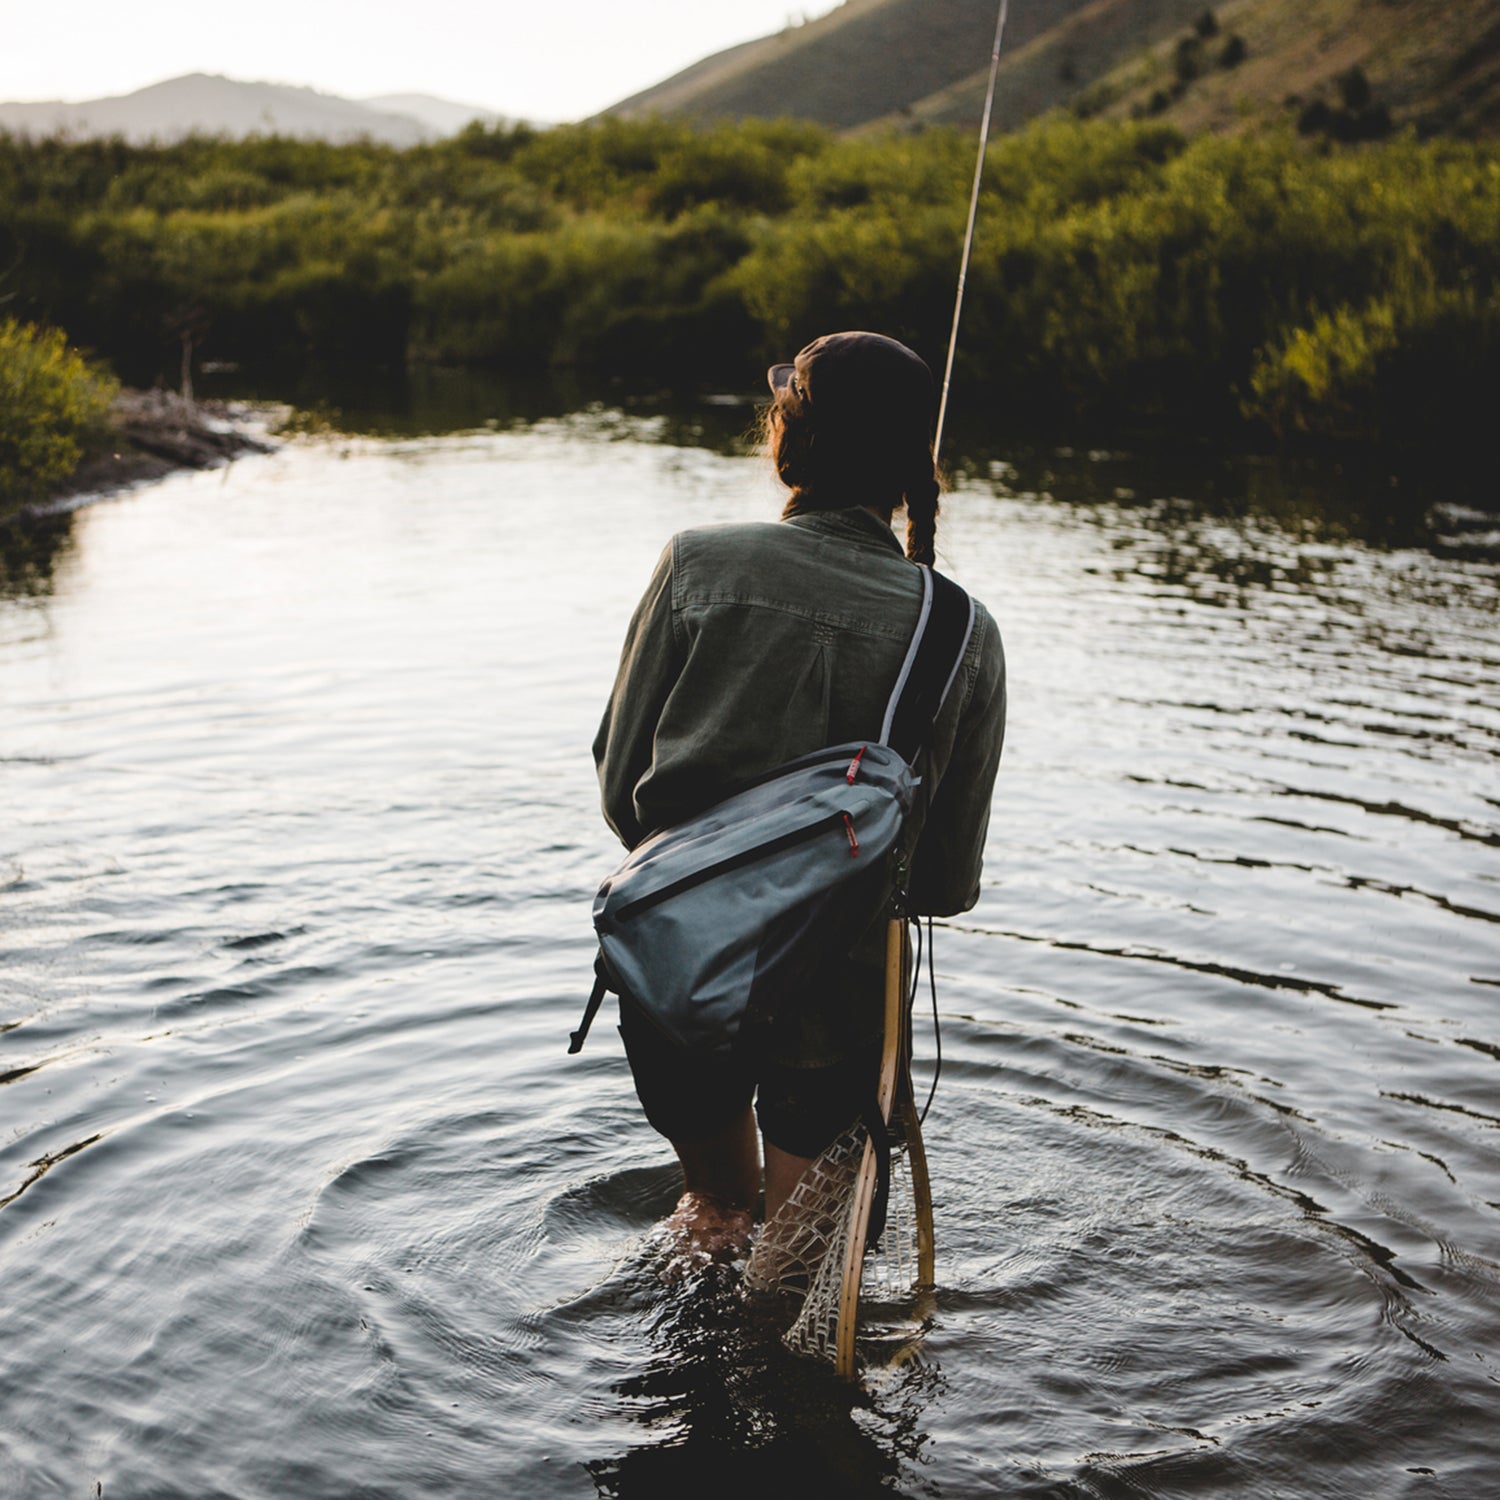 The Best Fly Fishing Gear for Backpacking